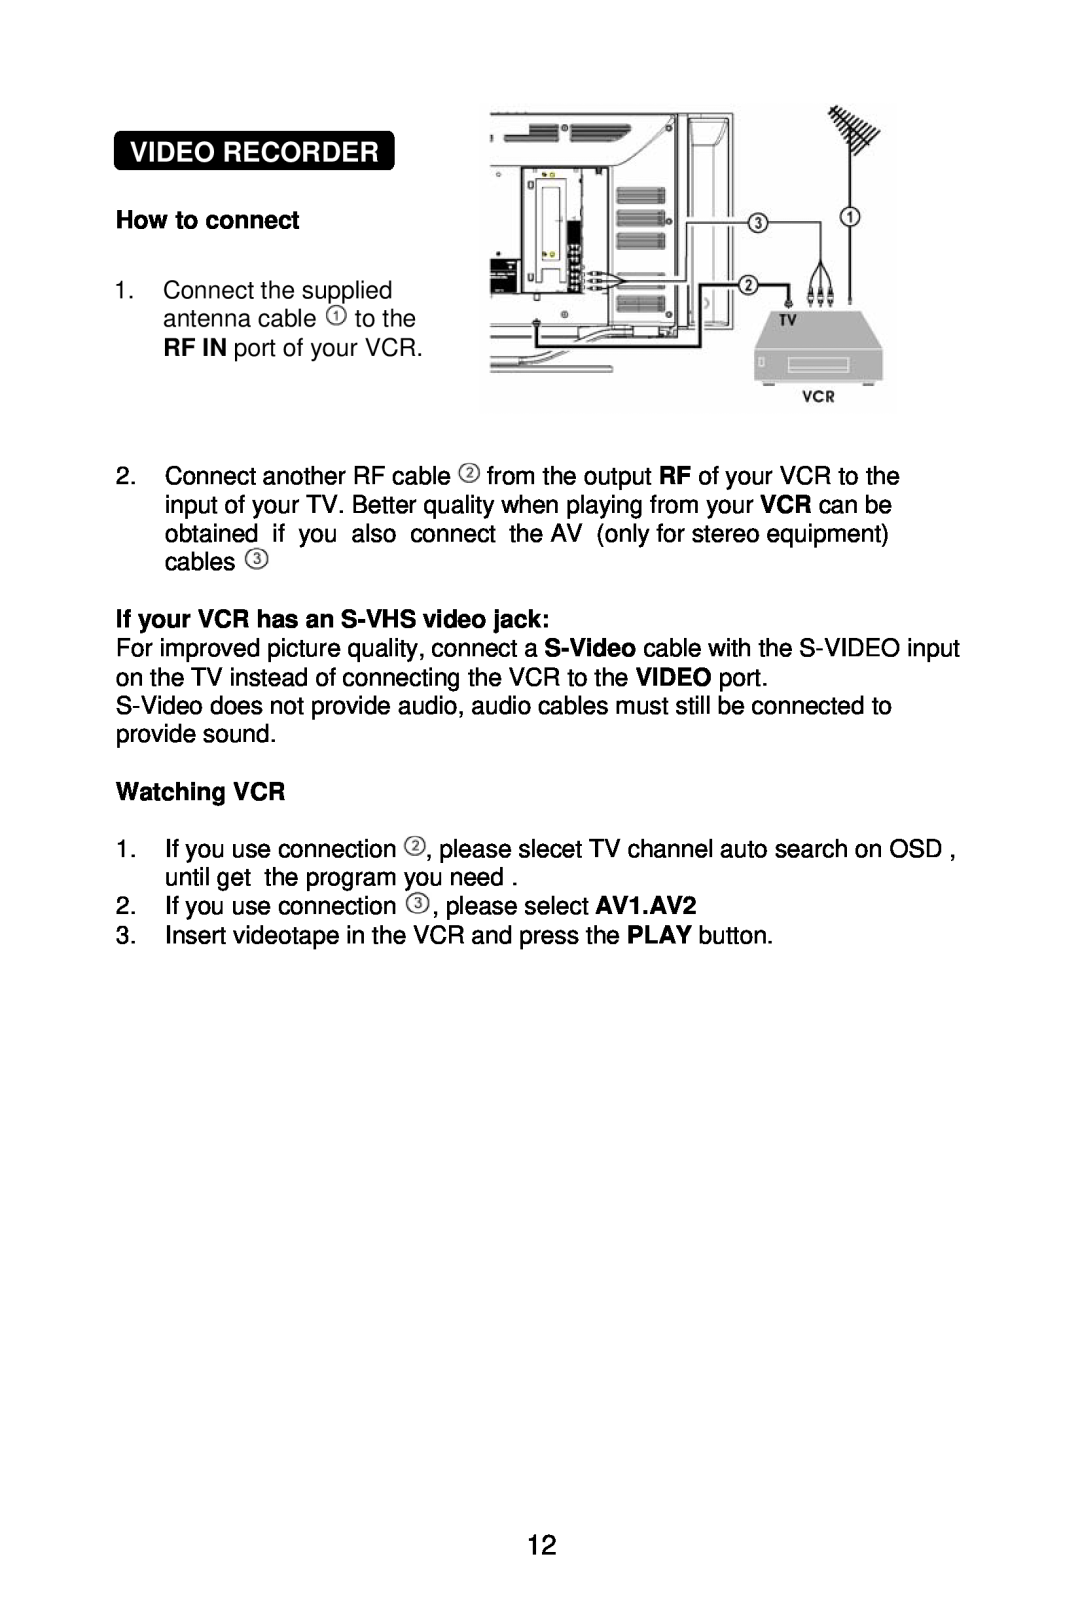 Mitsubishi Electronics DV321 user manual Video Recorder, How to connect, If your VCR has an S-VHS video jack, Watching VCR 